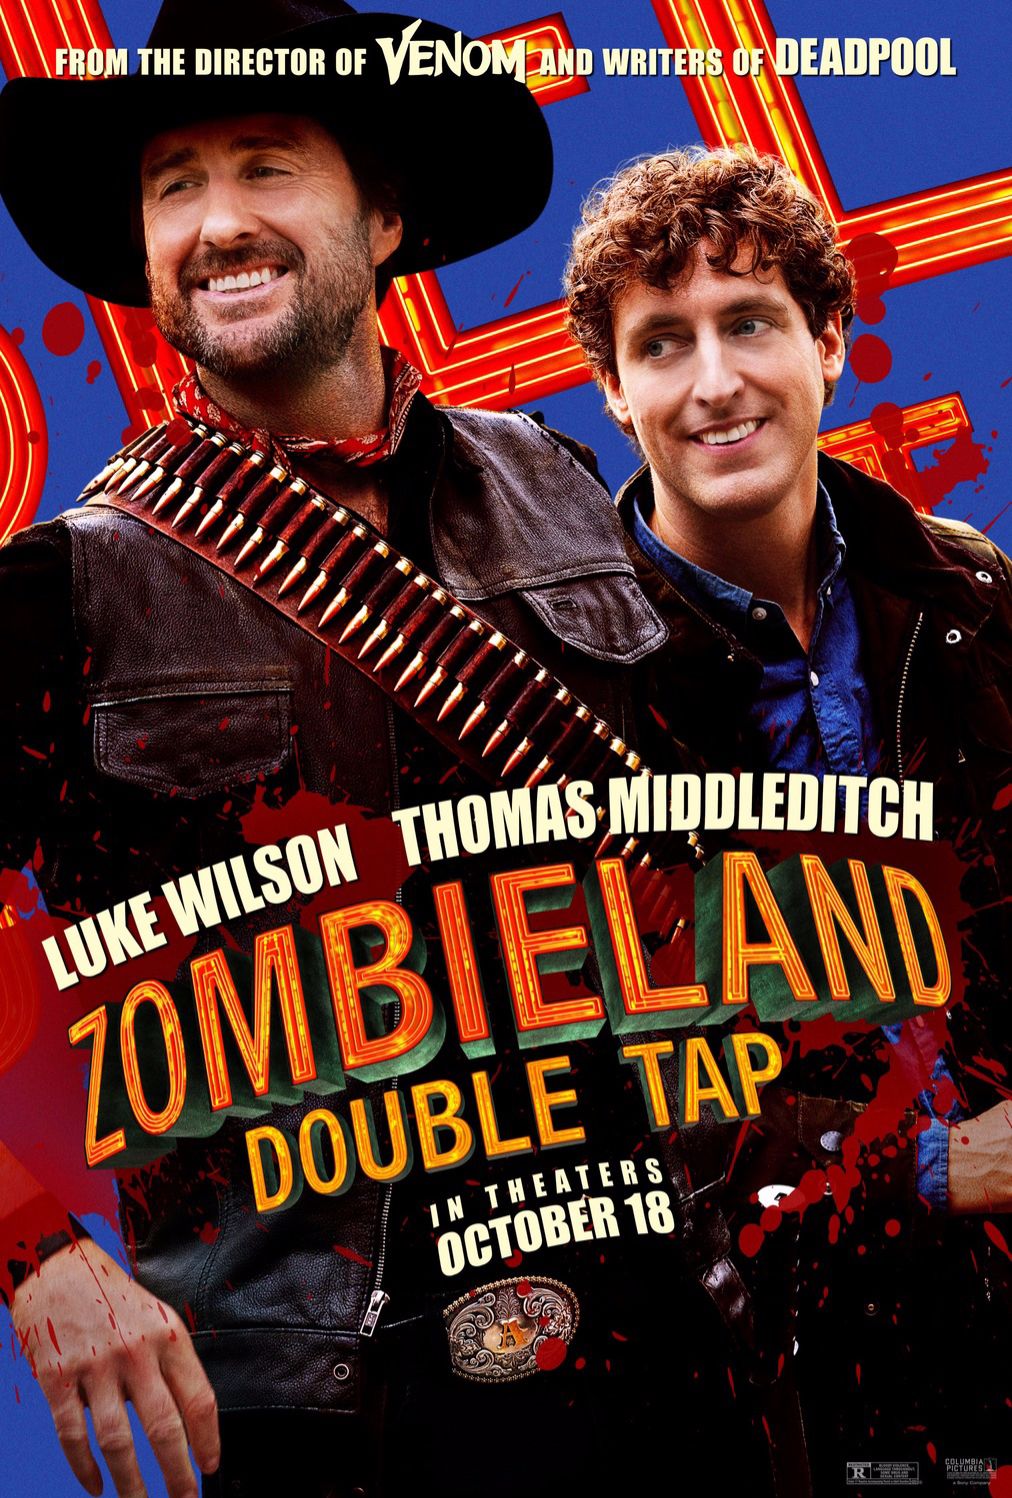 Zombieland Double Tap Character Posters #7